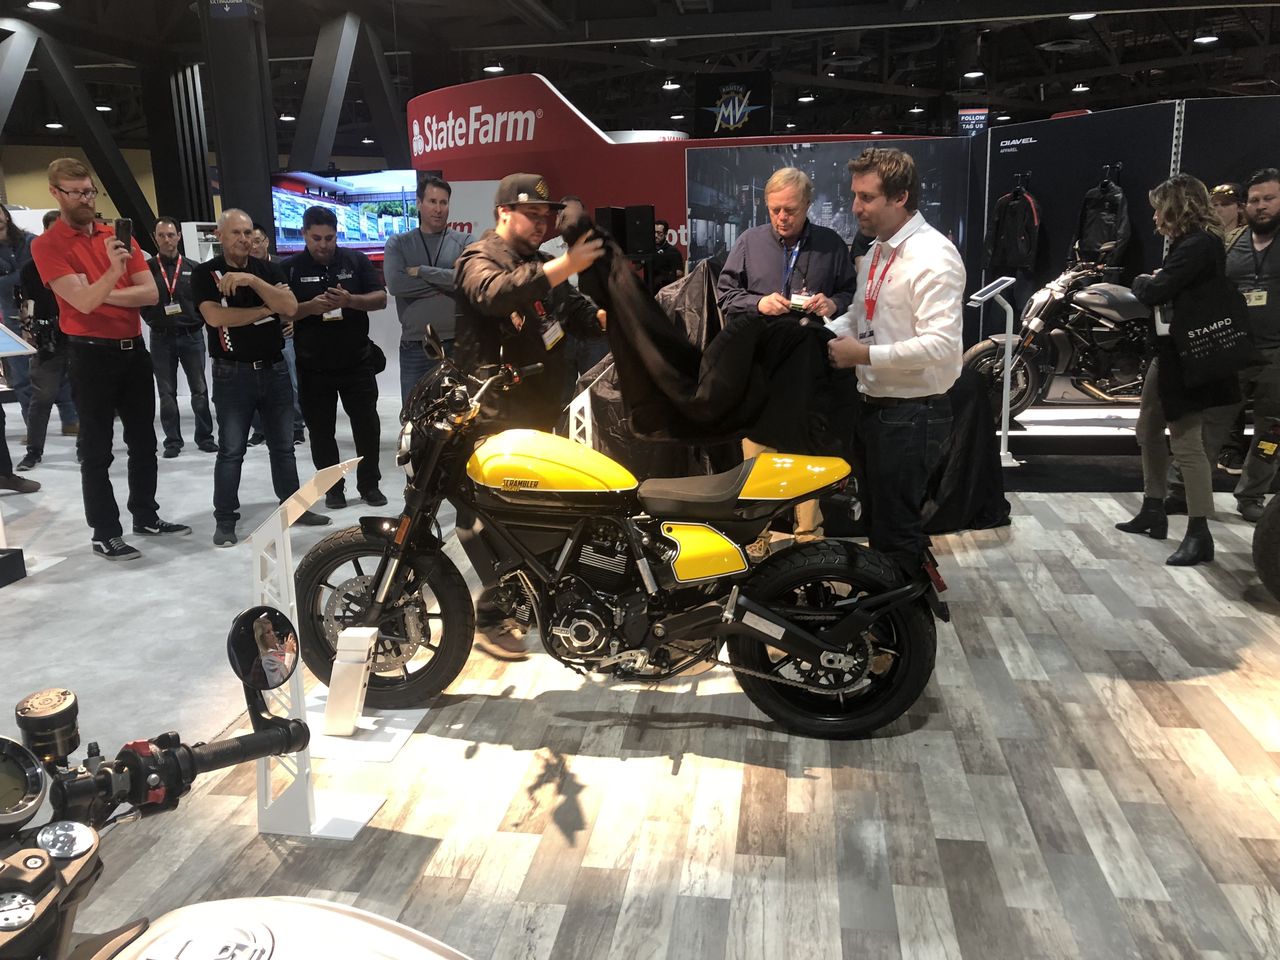 Ducati also debuted its updated Scrambler models at IMS Long Beach